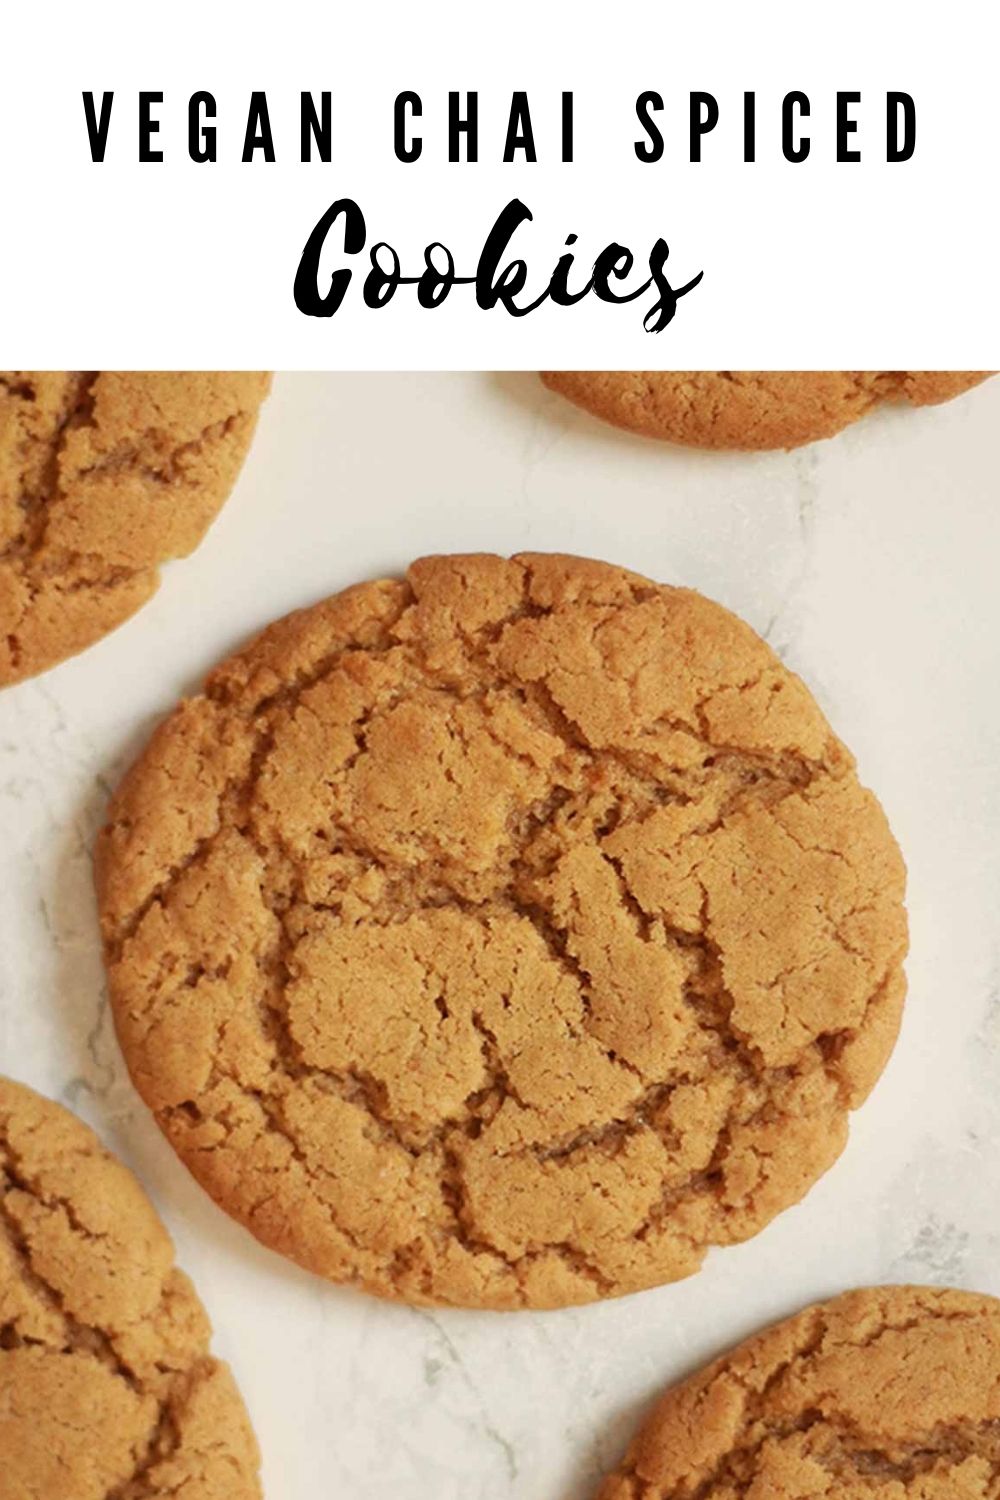 Pinterest Pin - image of cookies alongside text that reads 'vegan chai spiced cookies'